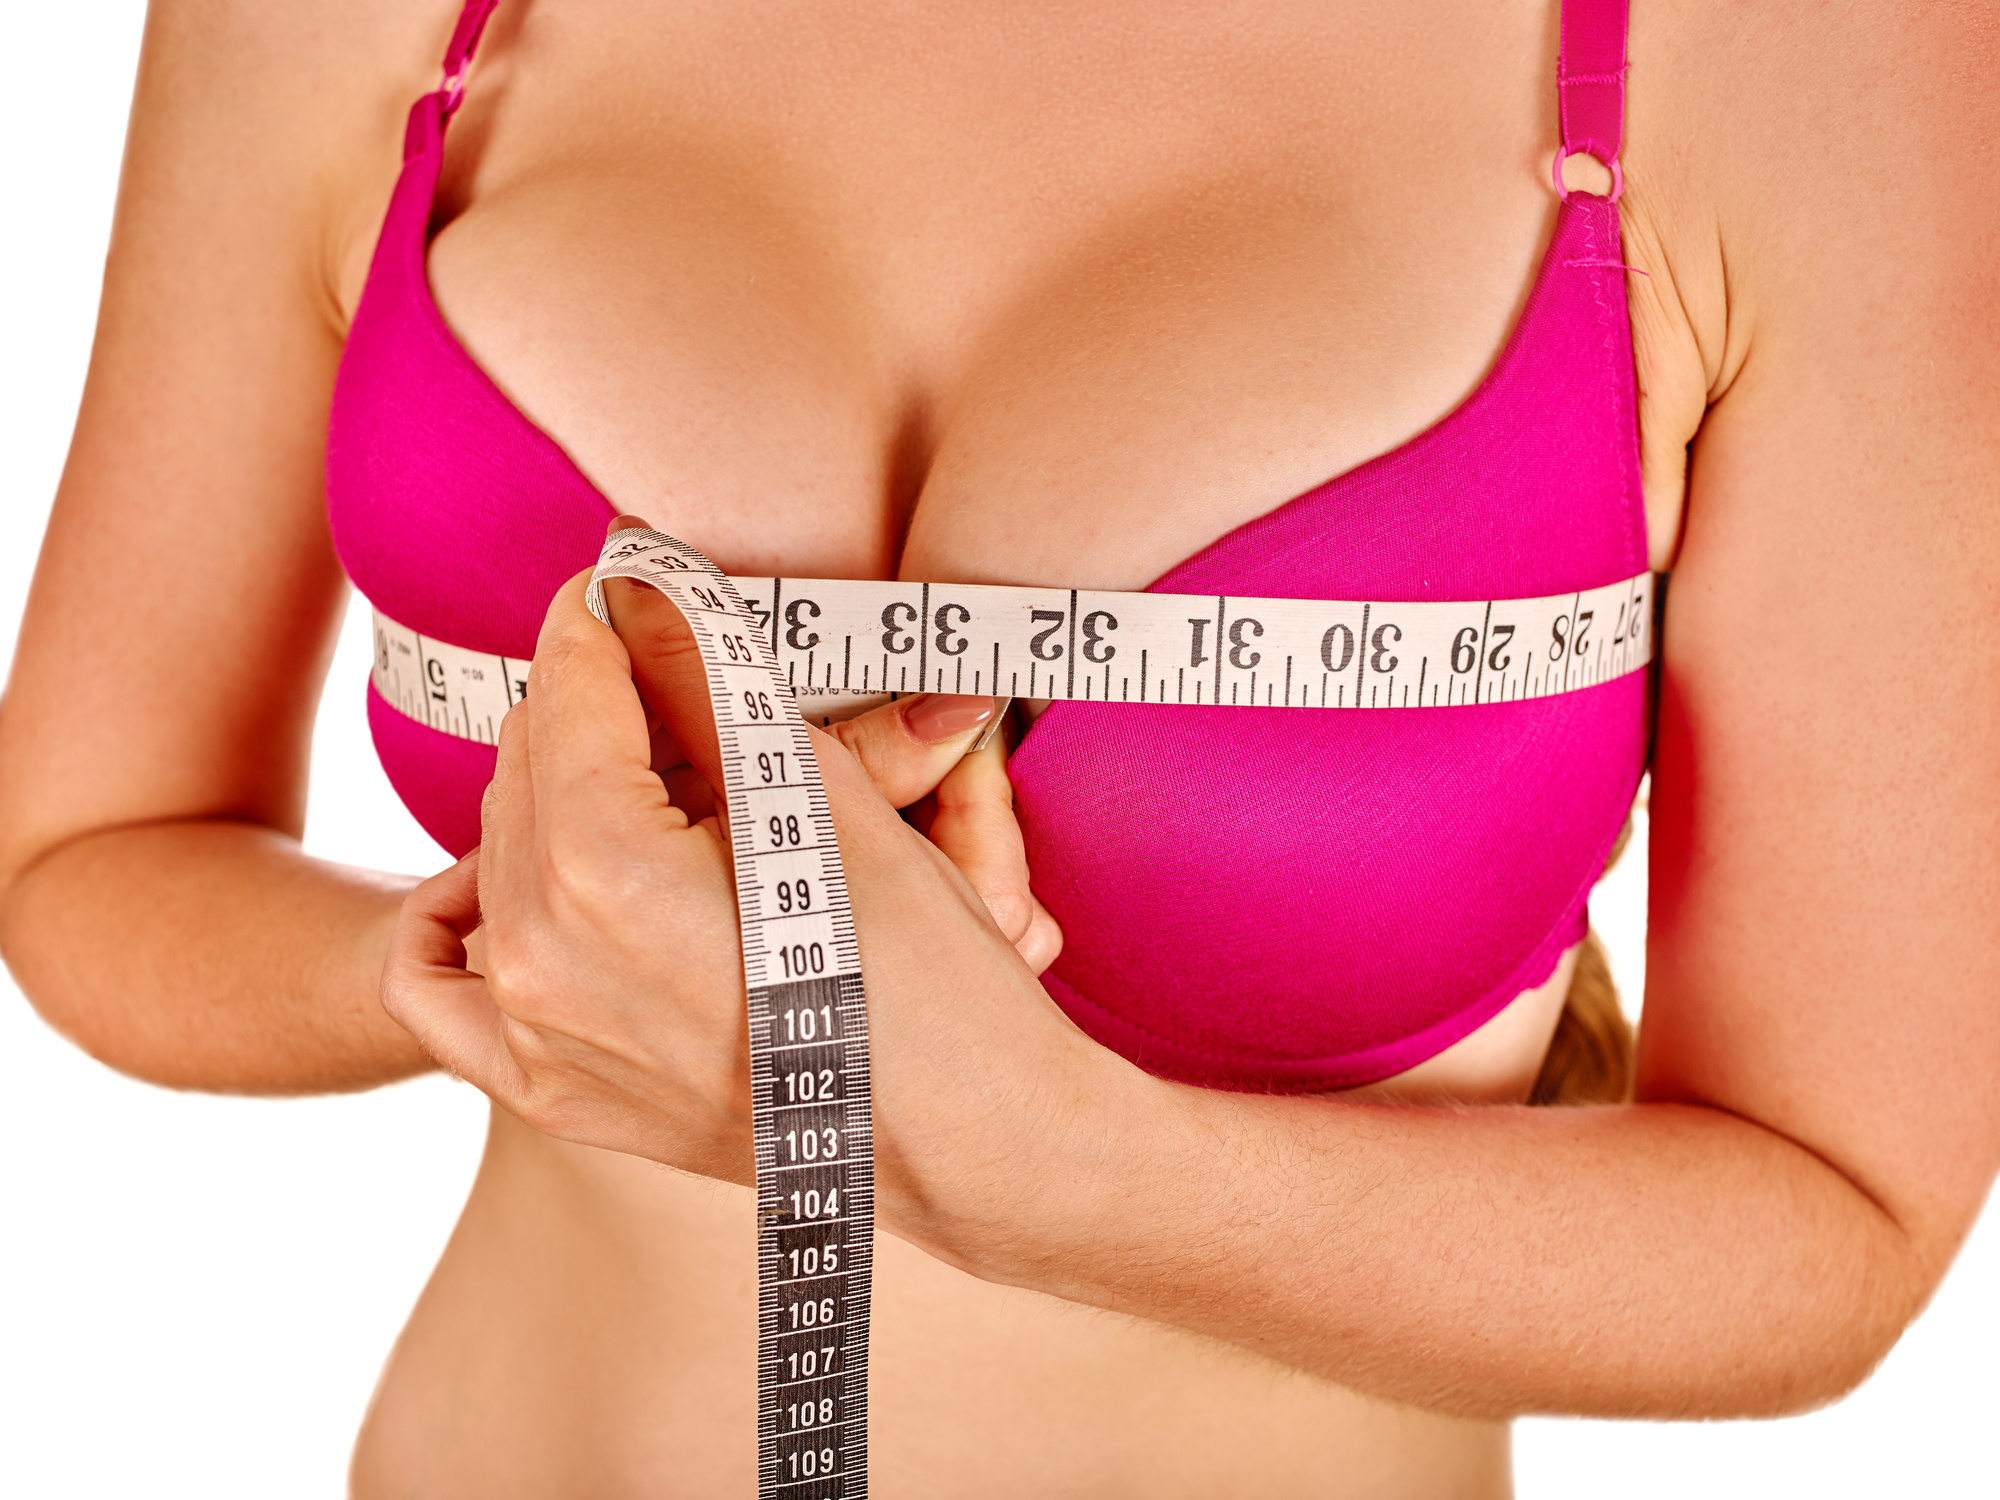 Reduce Breast Size, Reduce Breast Size Naturally